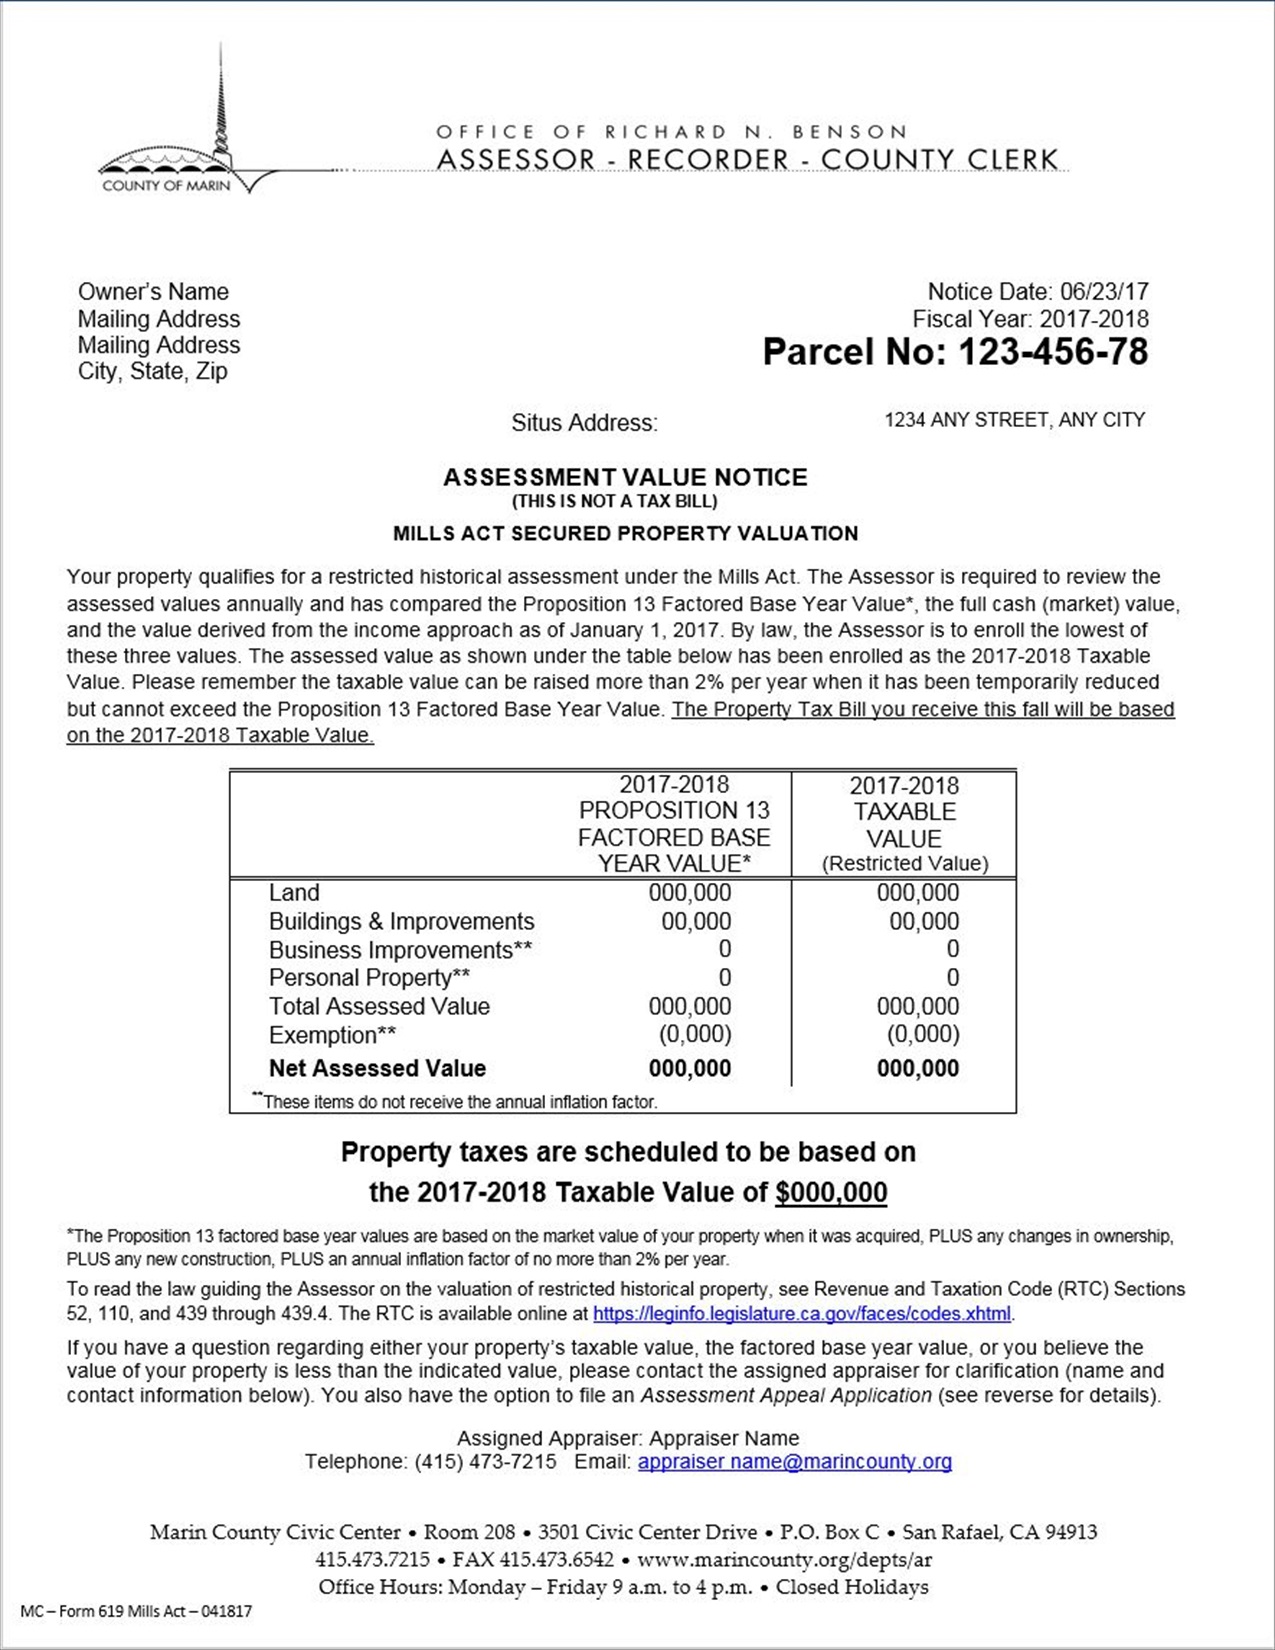 property-value-notices-assessor-county-of-marin